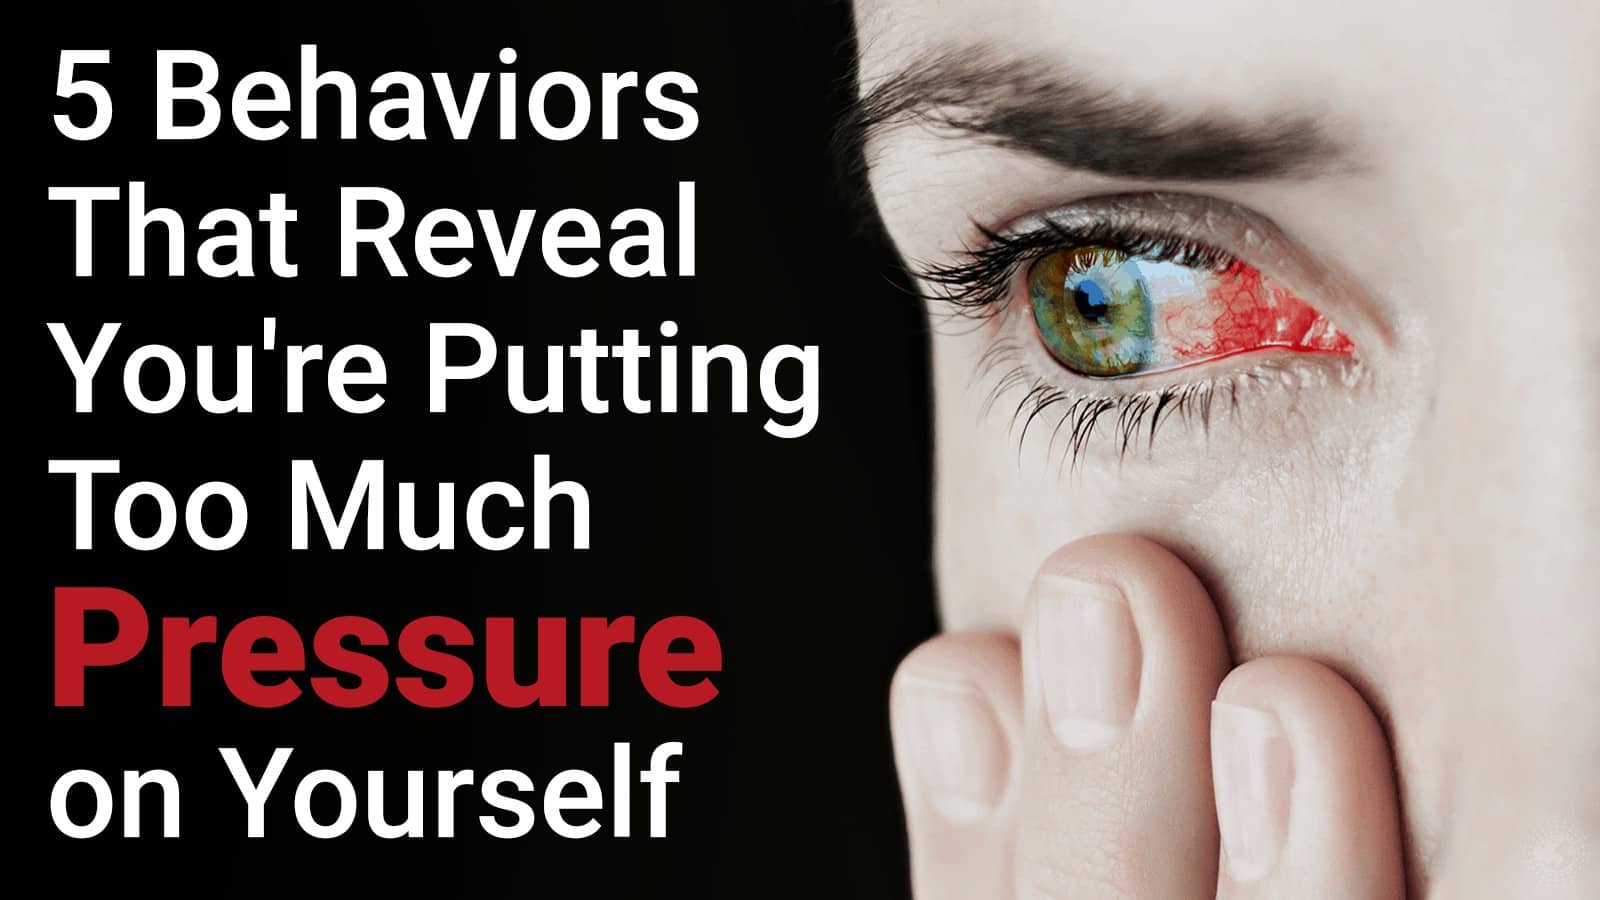 5 Behaviors That Reveal You’re Putting Too Much Pressure on Yourself